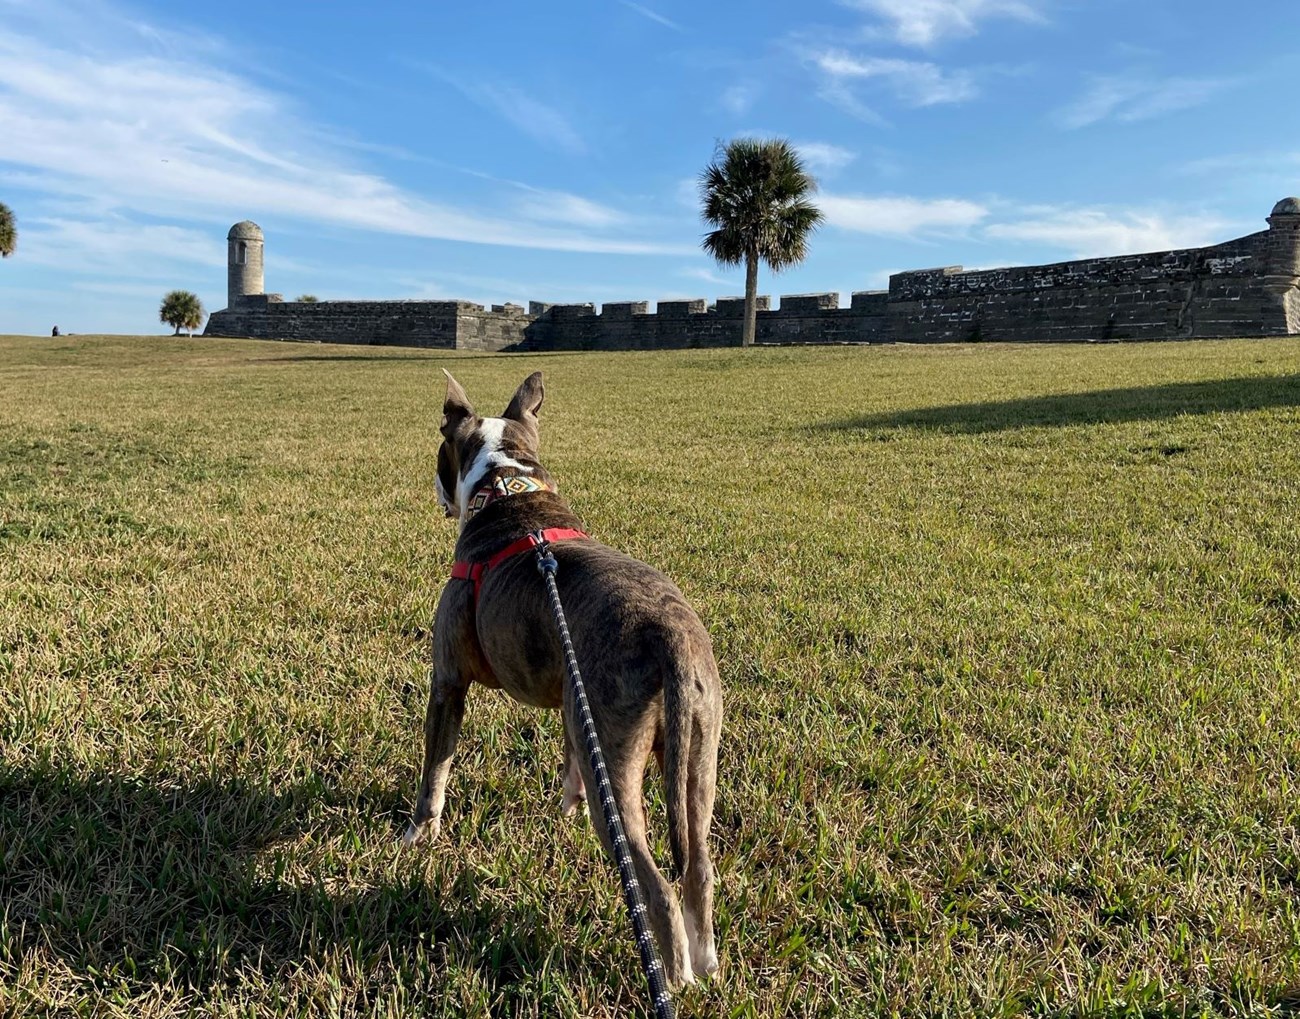 A stocky brown and white dog stands at attention, staring at the Castillo in the background